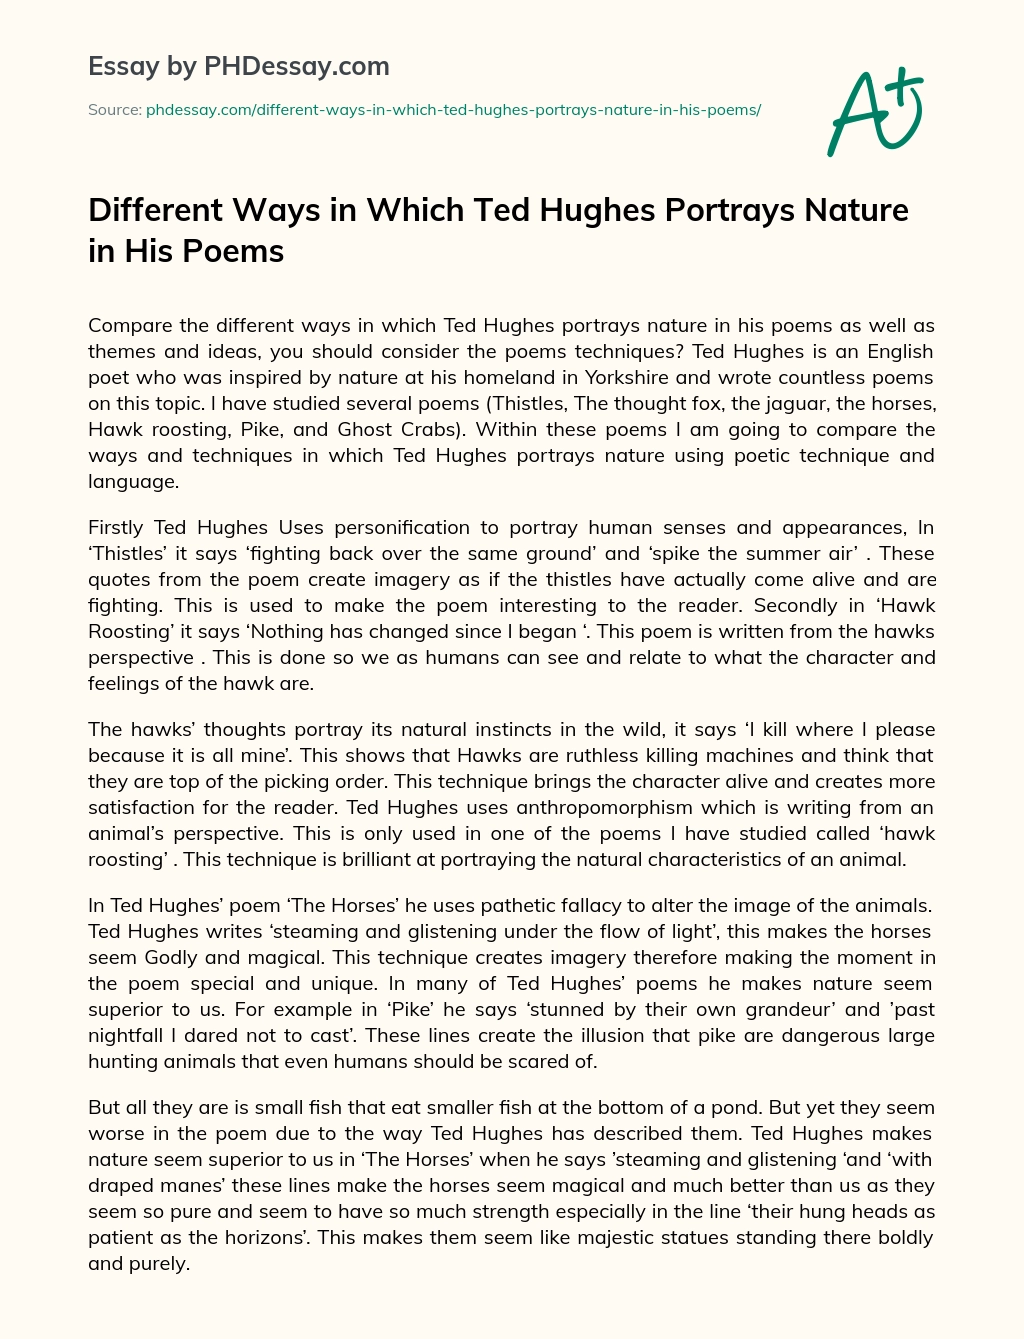 Different Ways In Which Ted Hughes Portrays Nature In His Poems Analysis  And Descriptive Essay (500 Words) 